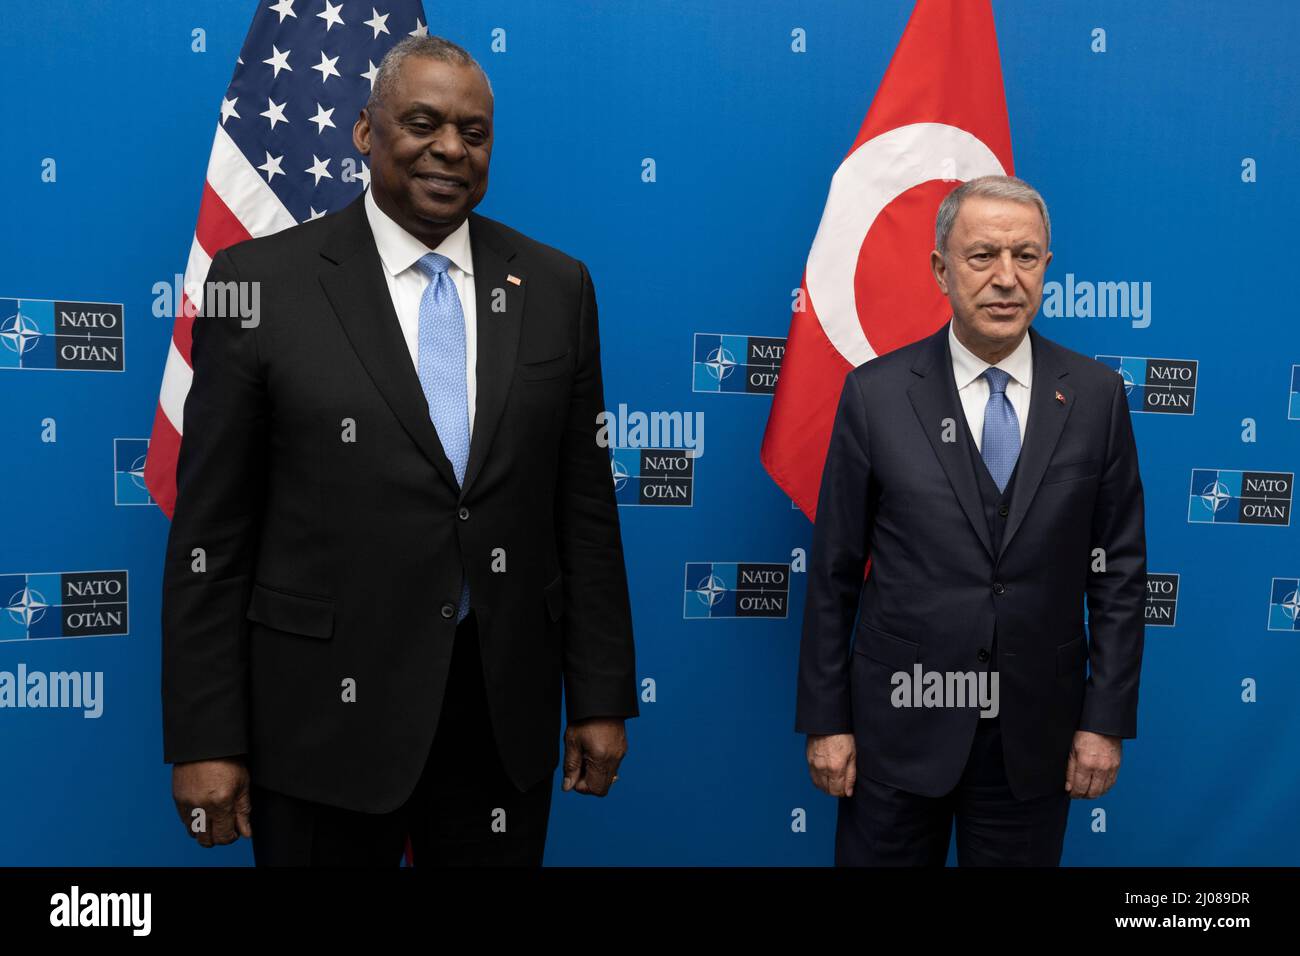 Brussels, Belgium. 16th Mar, 2022. U.S. Secretary of Defense Lloyd J. Austin III, left, stands with Turkish Minister of National Defence Hulusi Akar on the sidelines of the defense ministerial meetings at NATO headquarters, March 16, 2022 in Brussels, Belgium. The meetings are to discuss the Russian invasion of Ukraine. Credit: Chad J. McNeeley/DOD/Alamy Live News Stock Photo